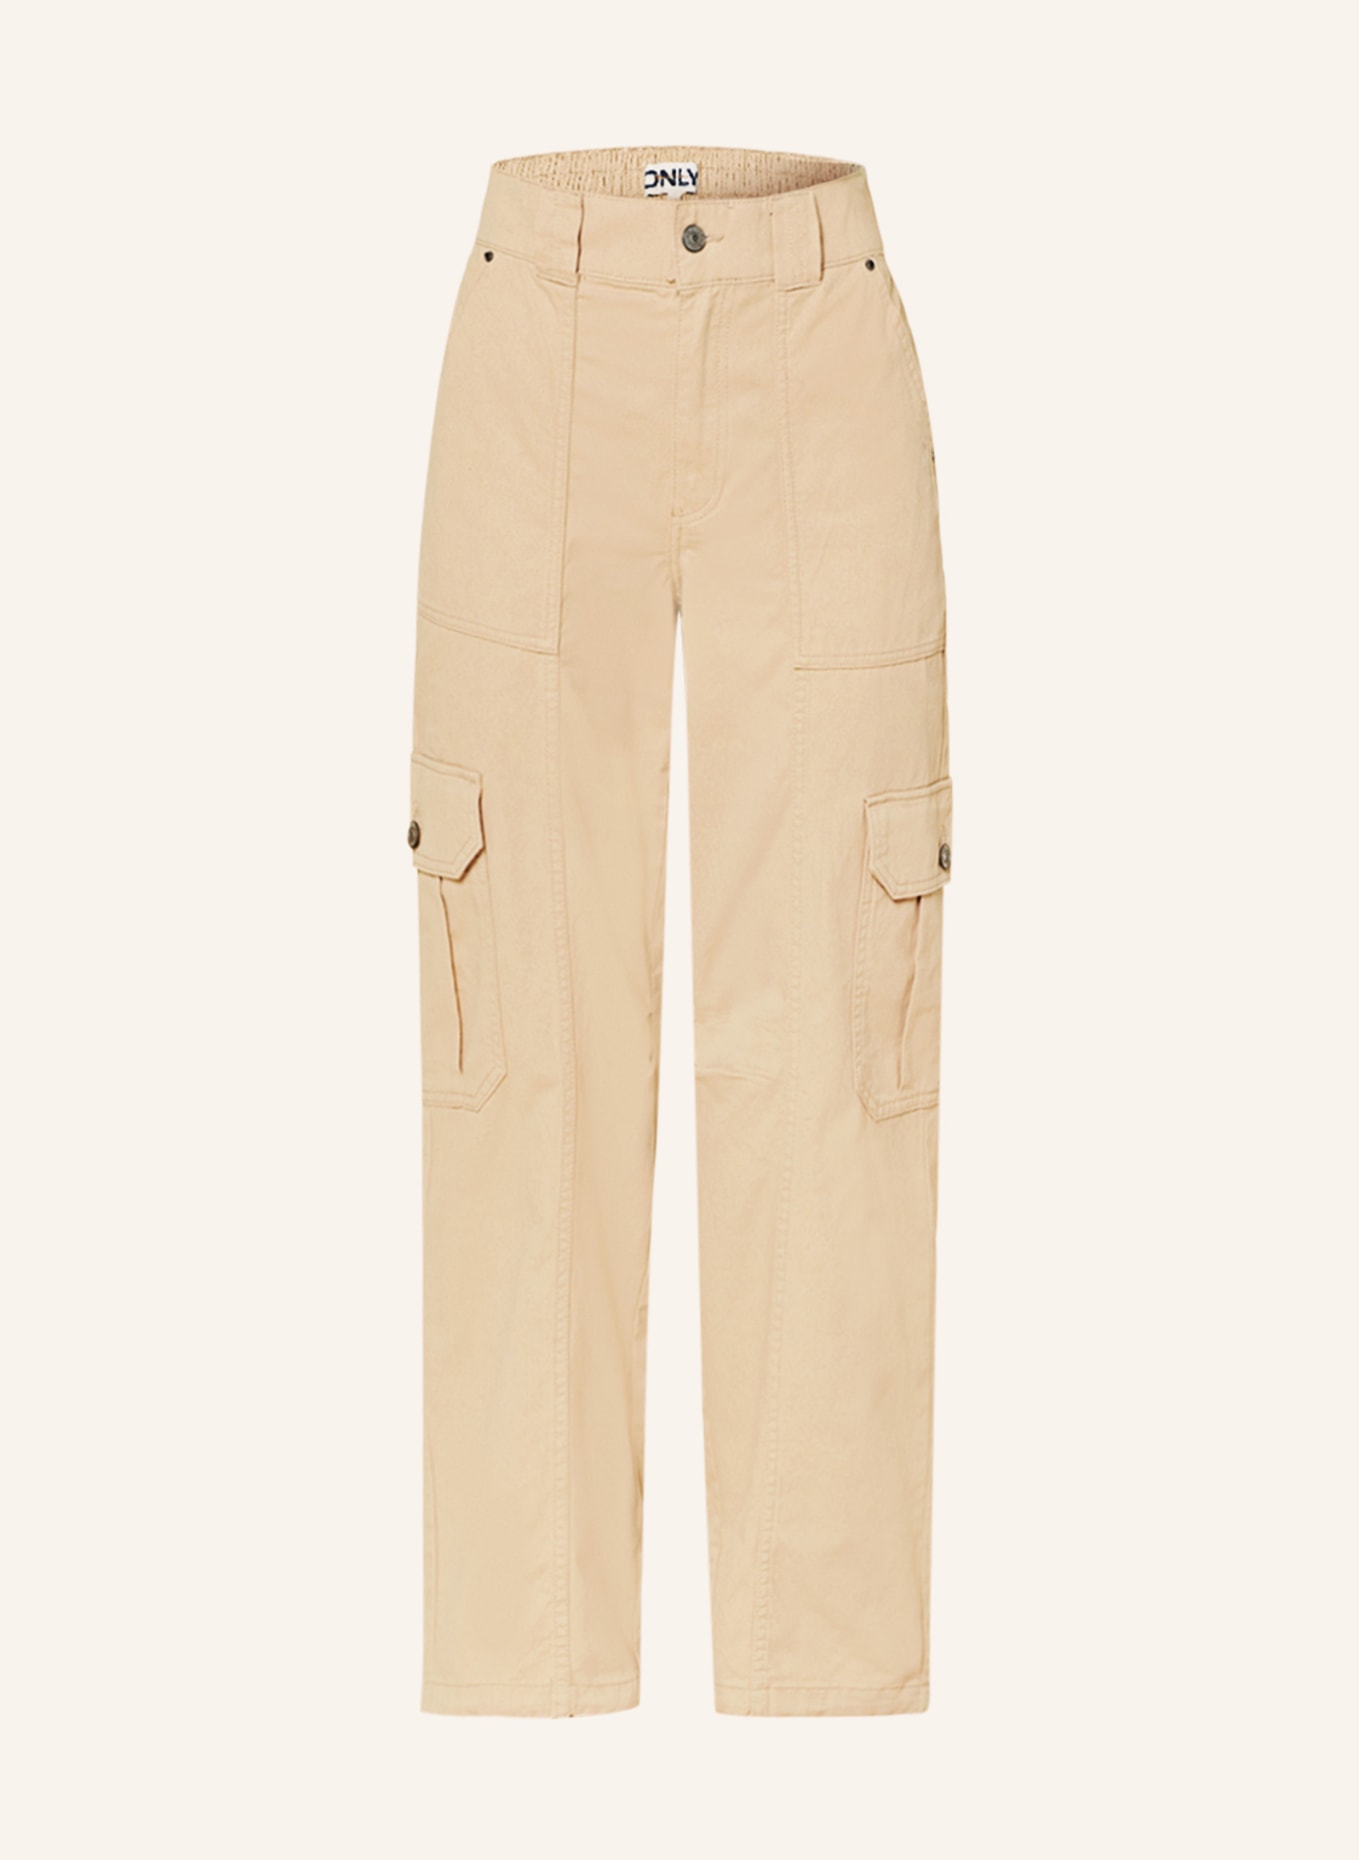 ONLY Cargo pants, Color: BEIGE (Image 1)